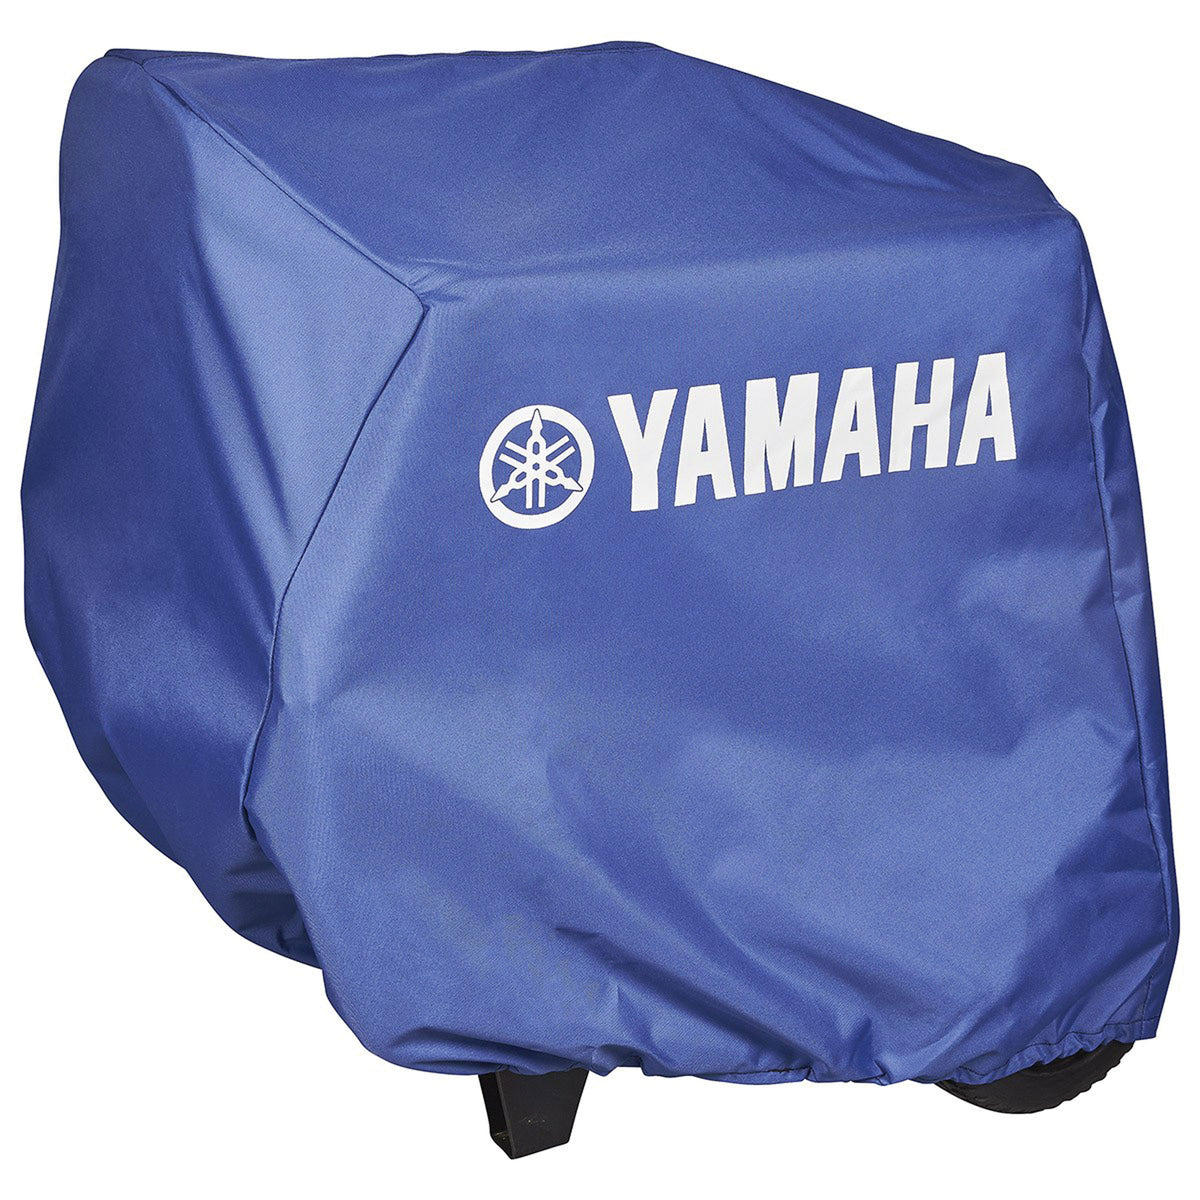 Yamaha ACC-PWCVR-40-00 Pressure Washer Cover - PW4040, Blue